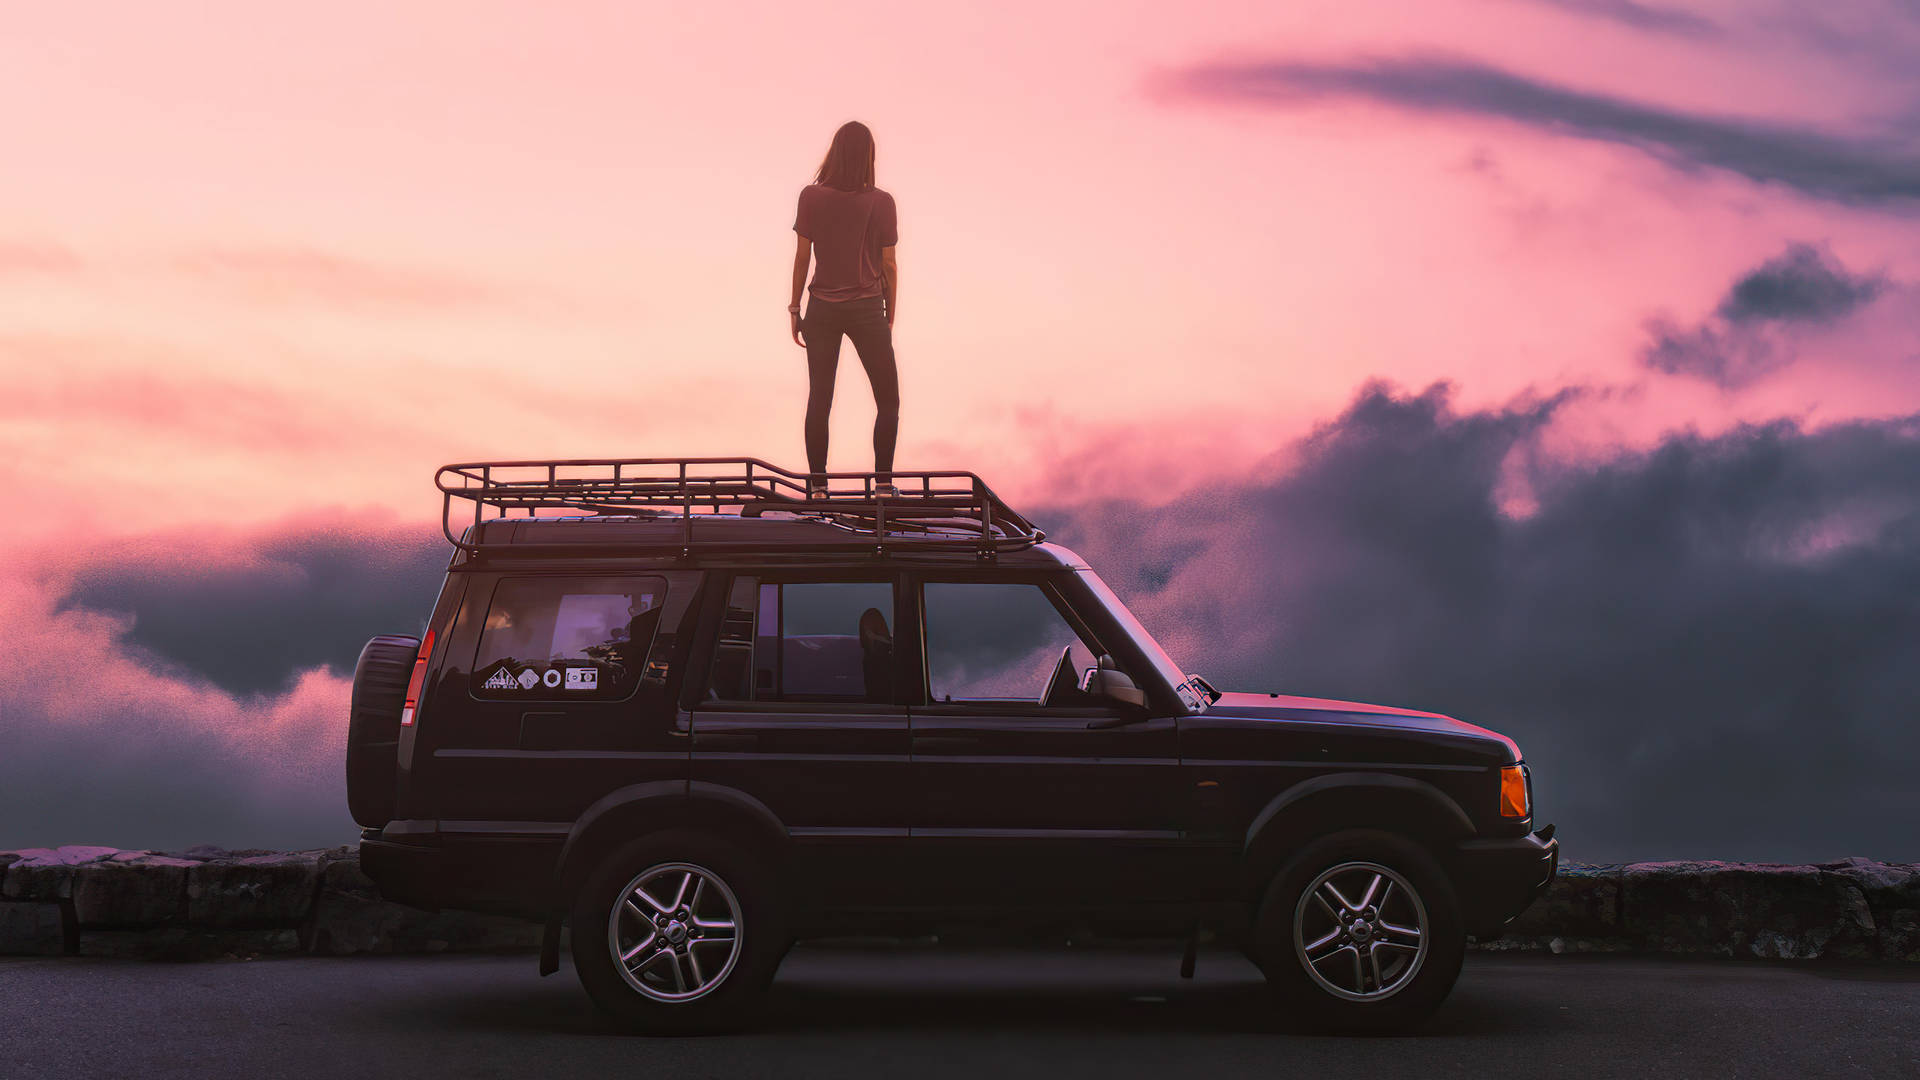 Aesthetic 4k Car With Woman On Top Background